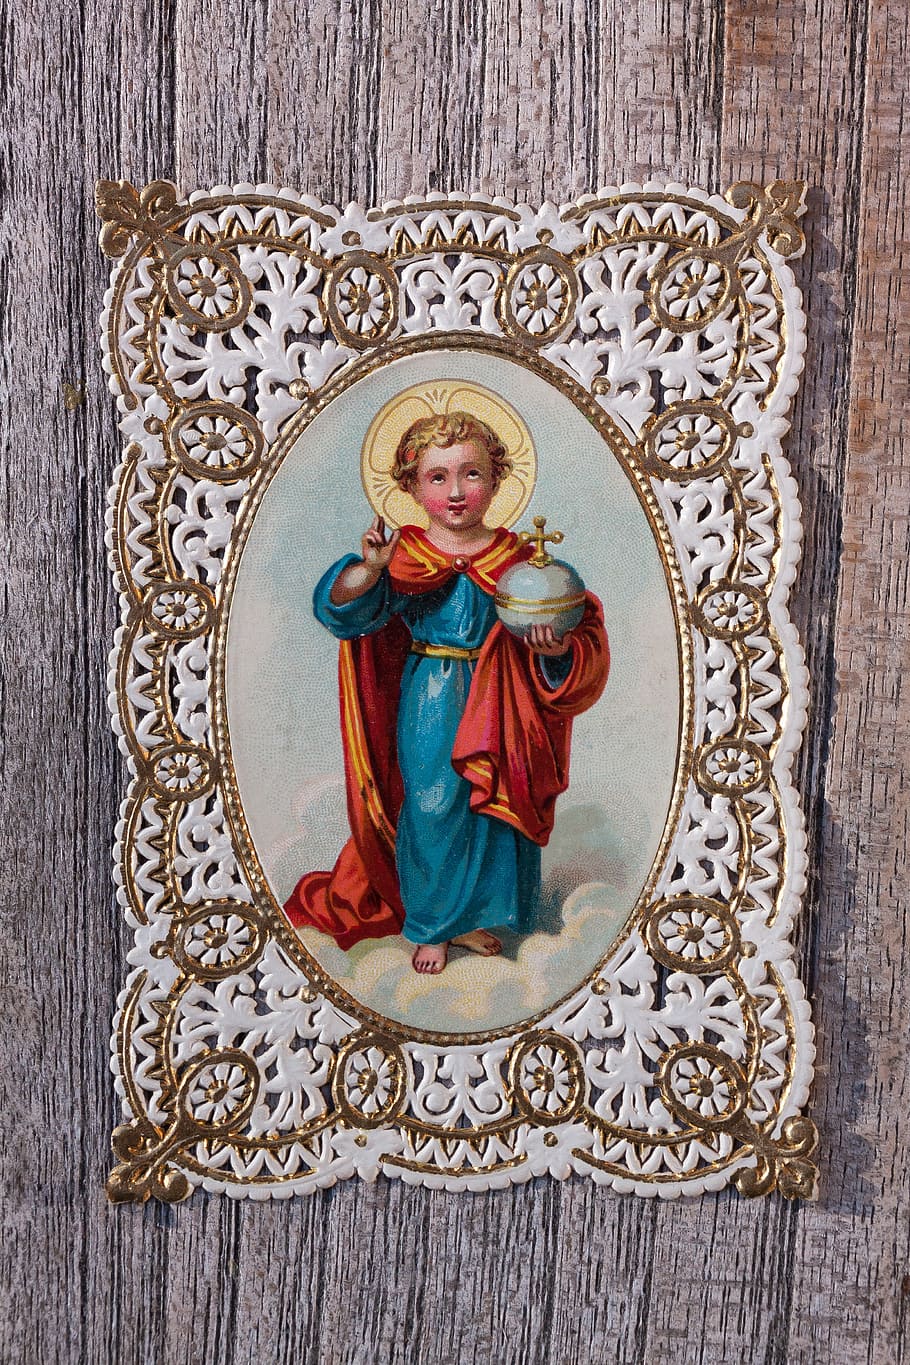 devotional picture, santino, top edge, gold, jesus, boy, flower, lily, old, antique